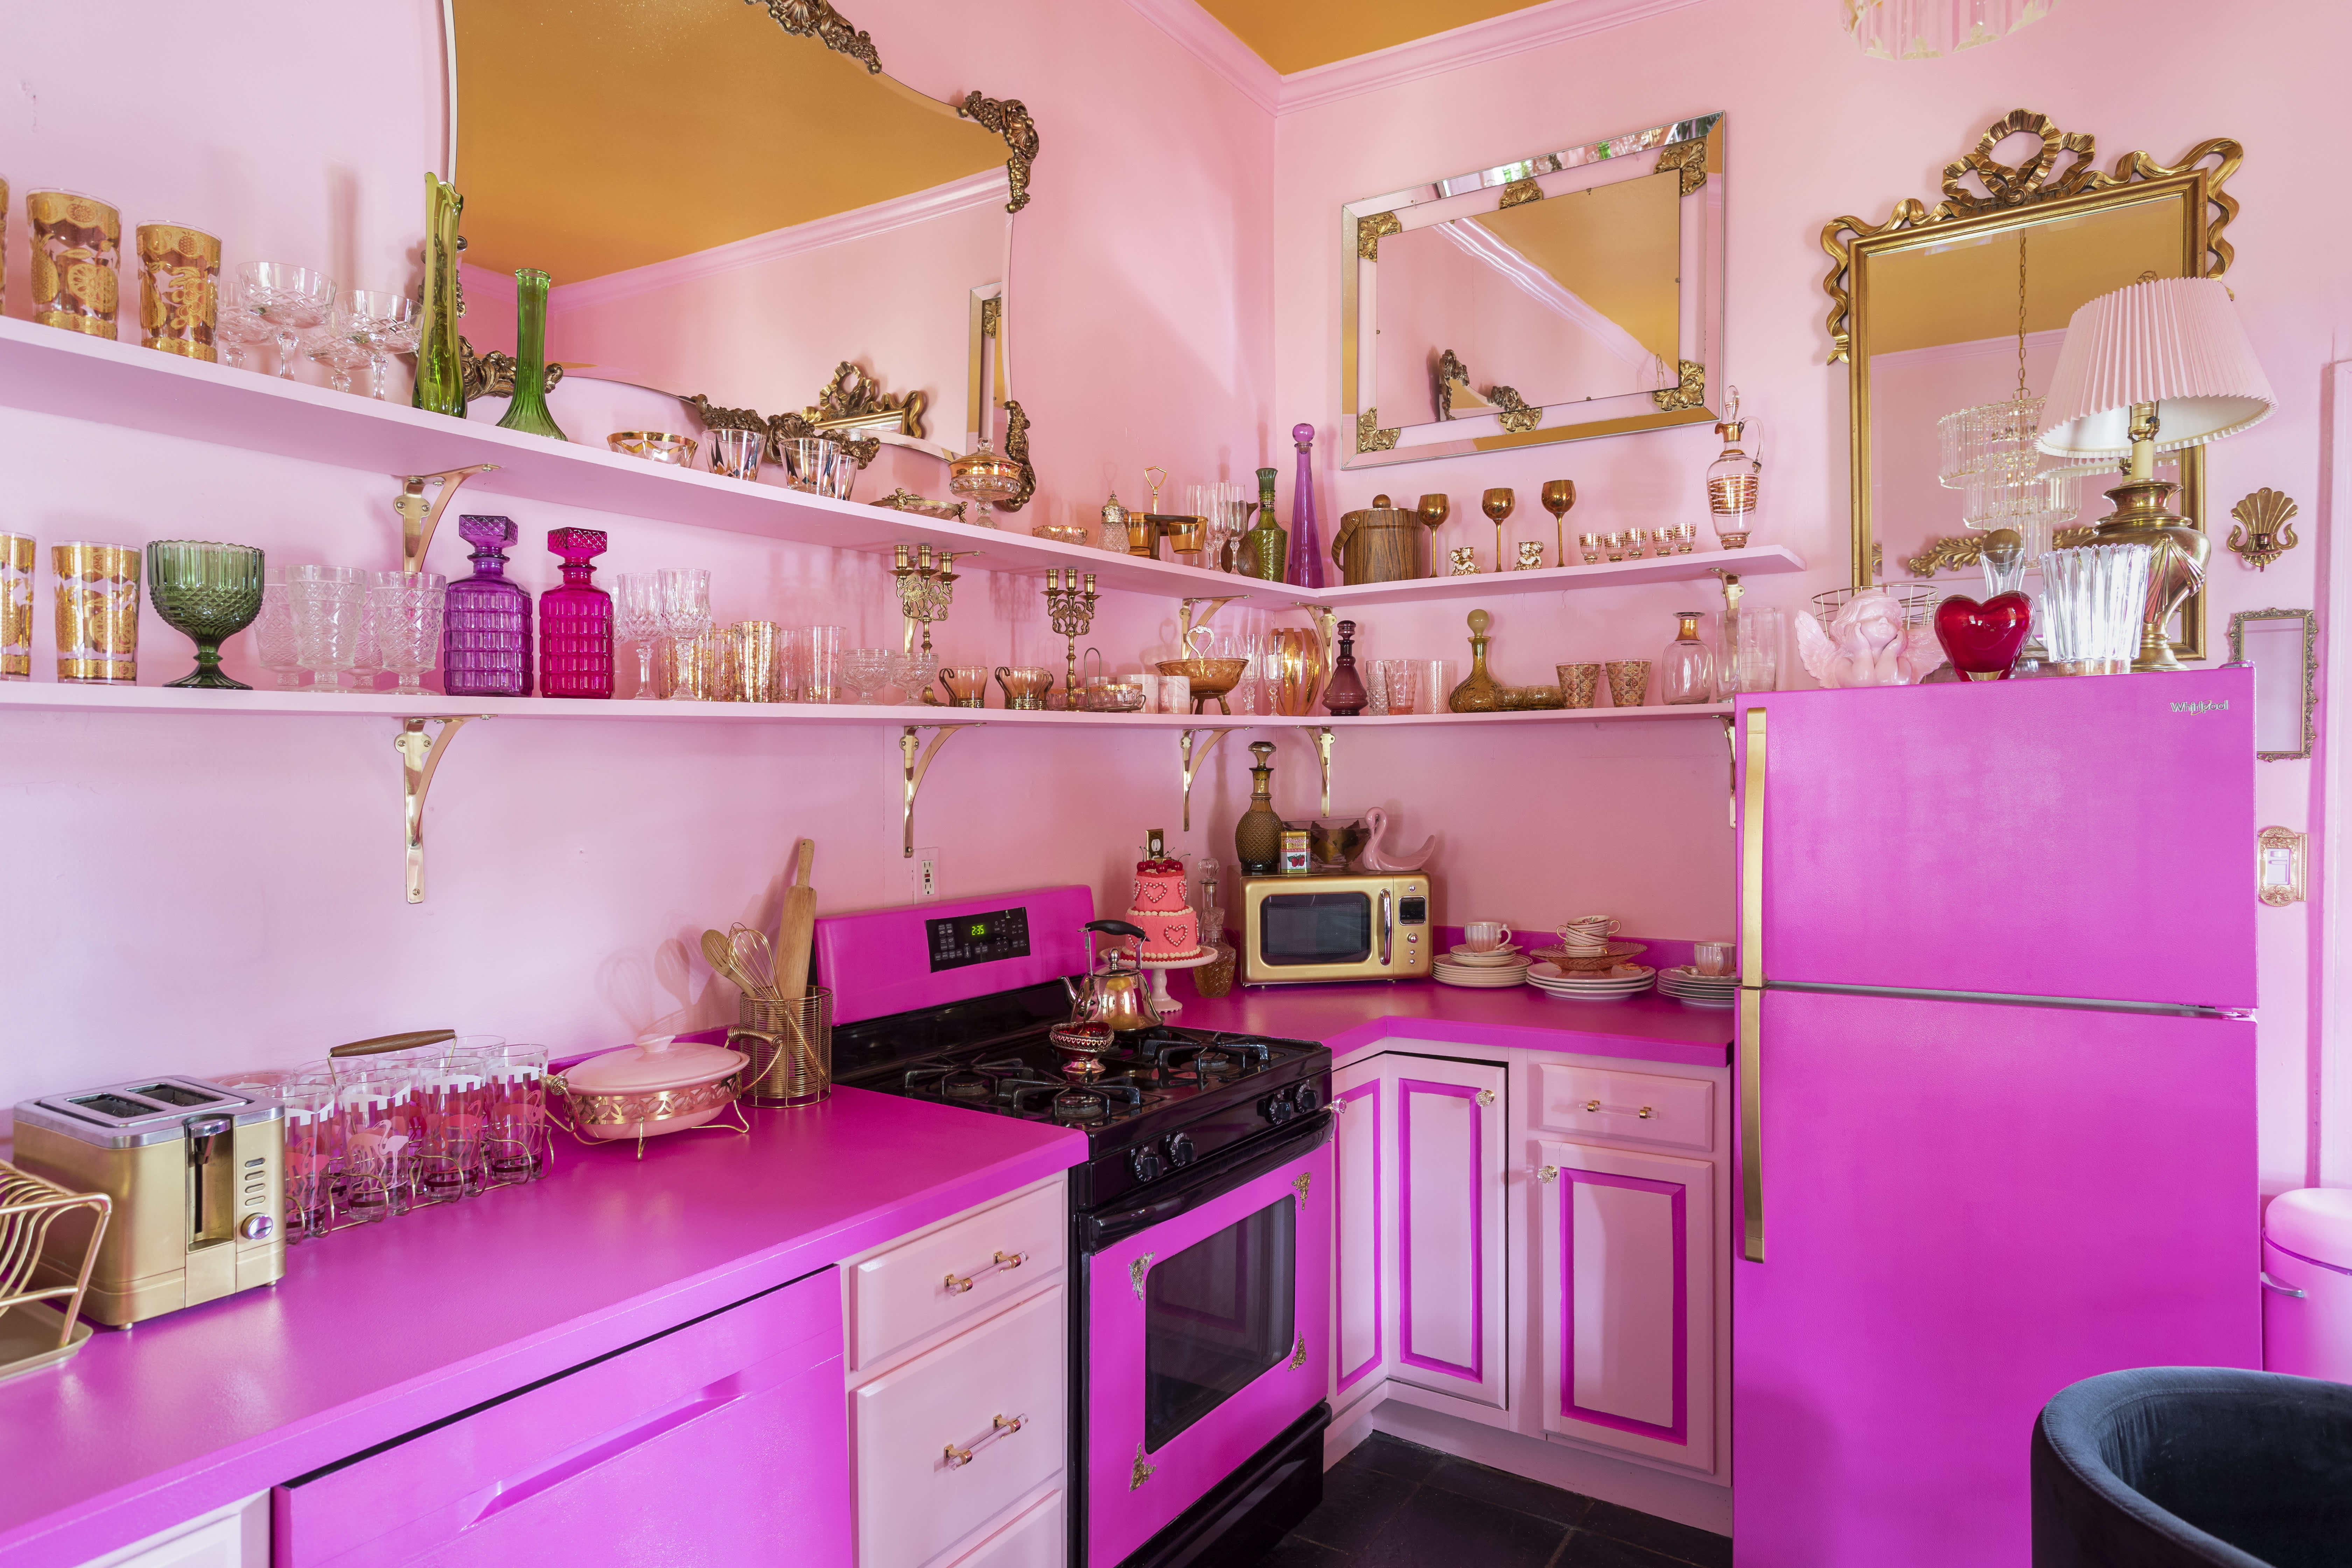 20 Ways To Decorate With Millennial Pink